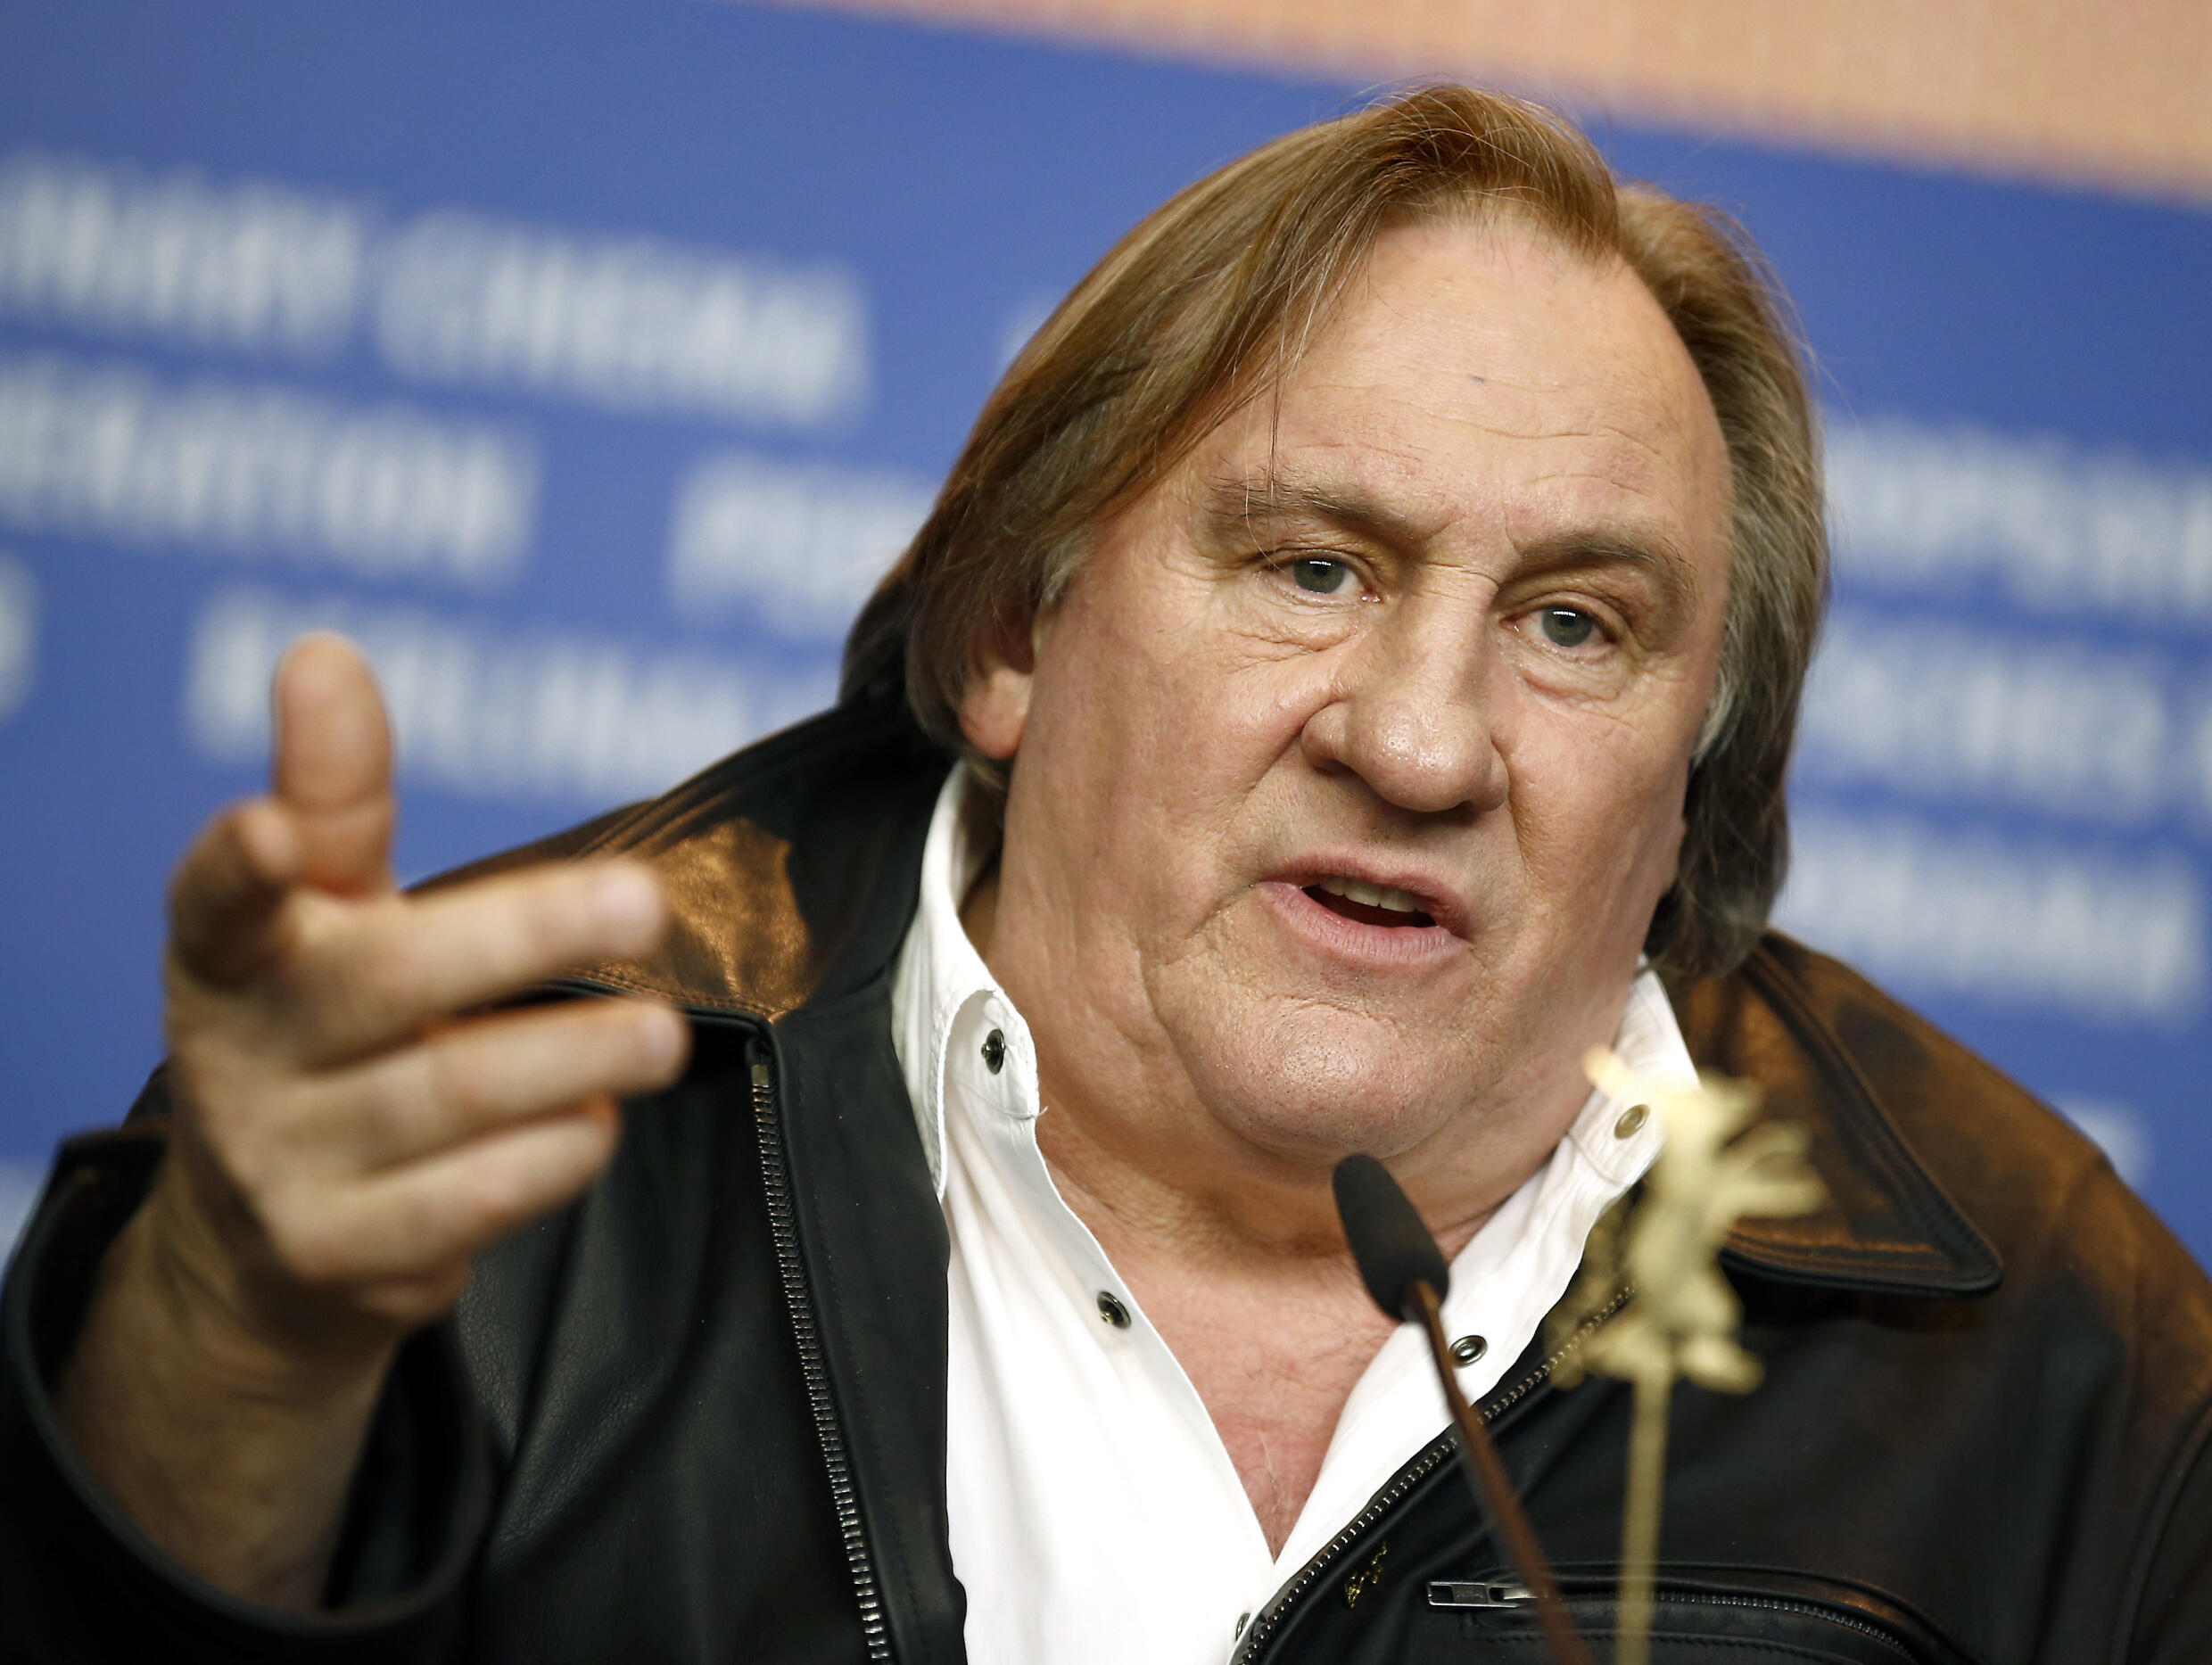 French actor Gérard Depardieu, pictured at the 2016 Berlin Film Festival, has faced a string of allegations of rape and sexual assault in recent years.